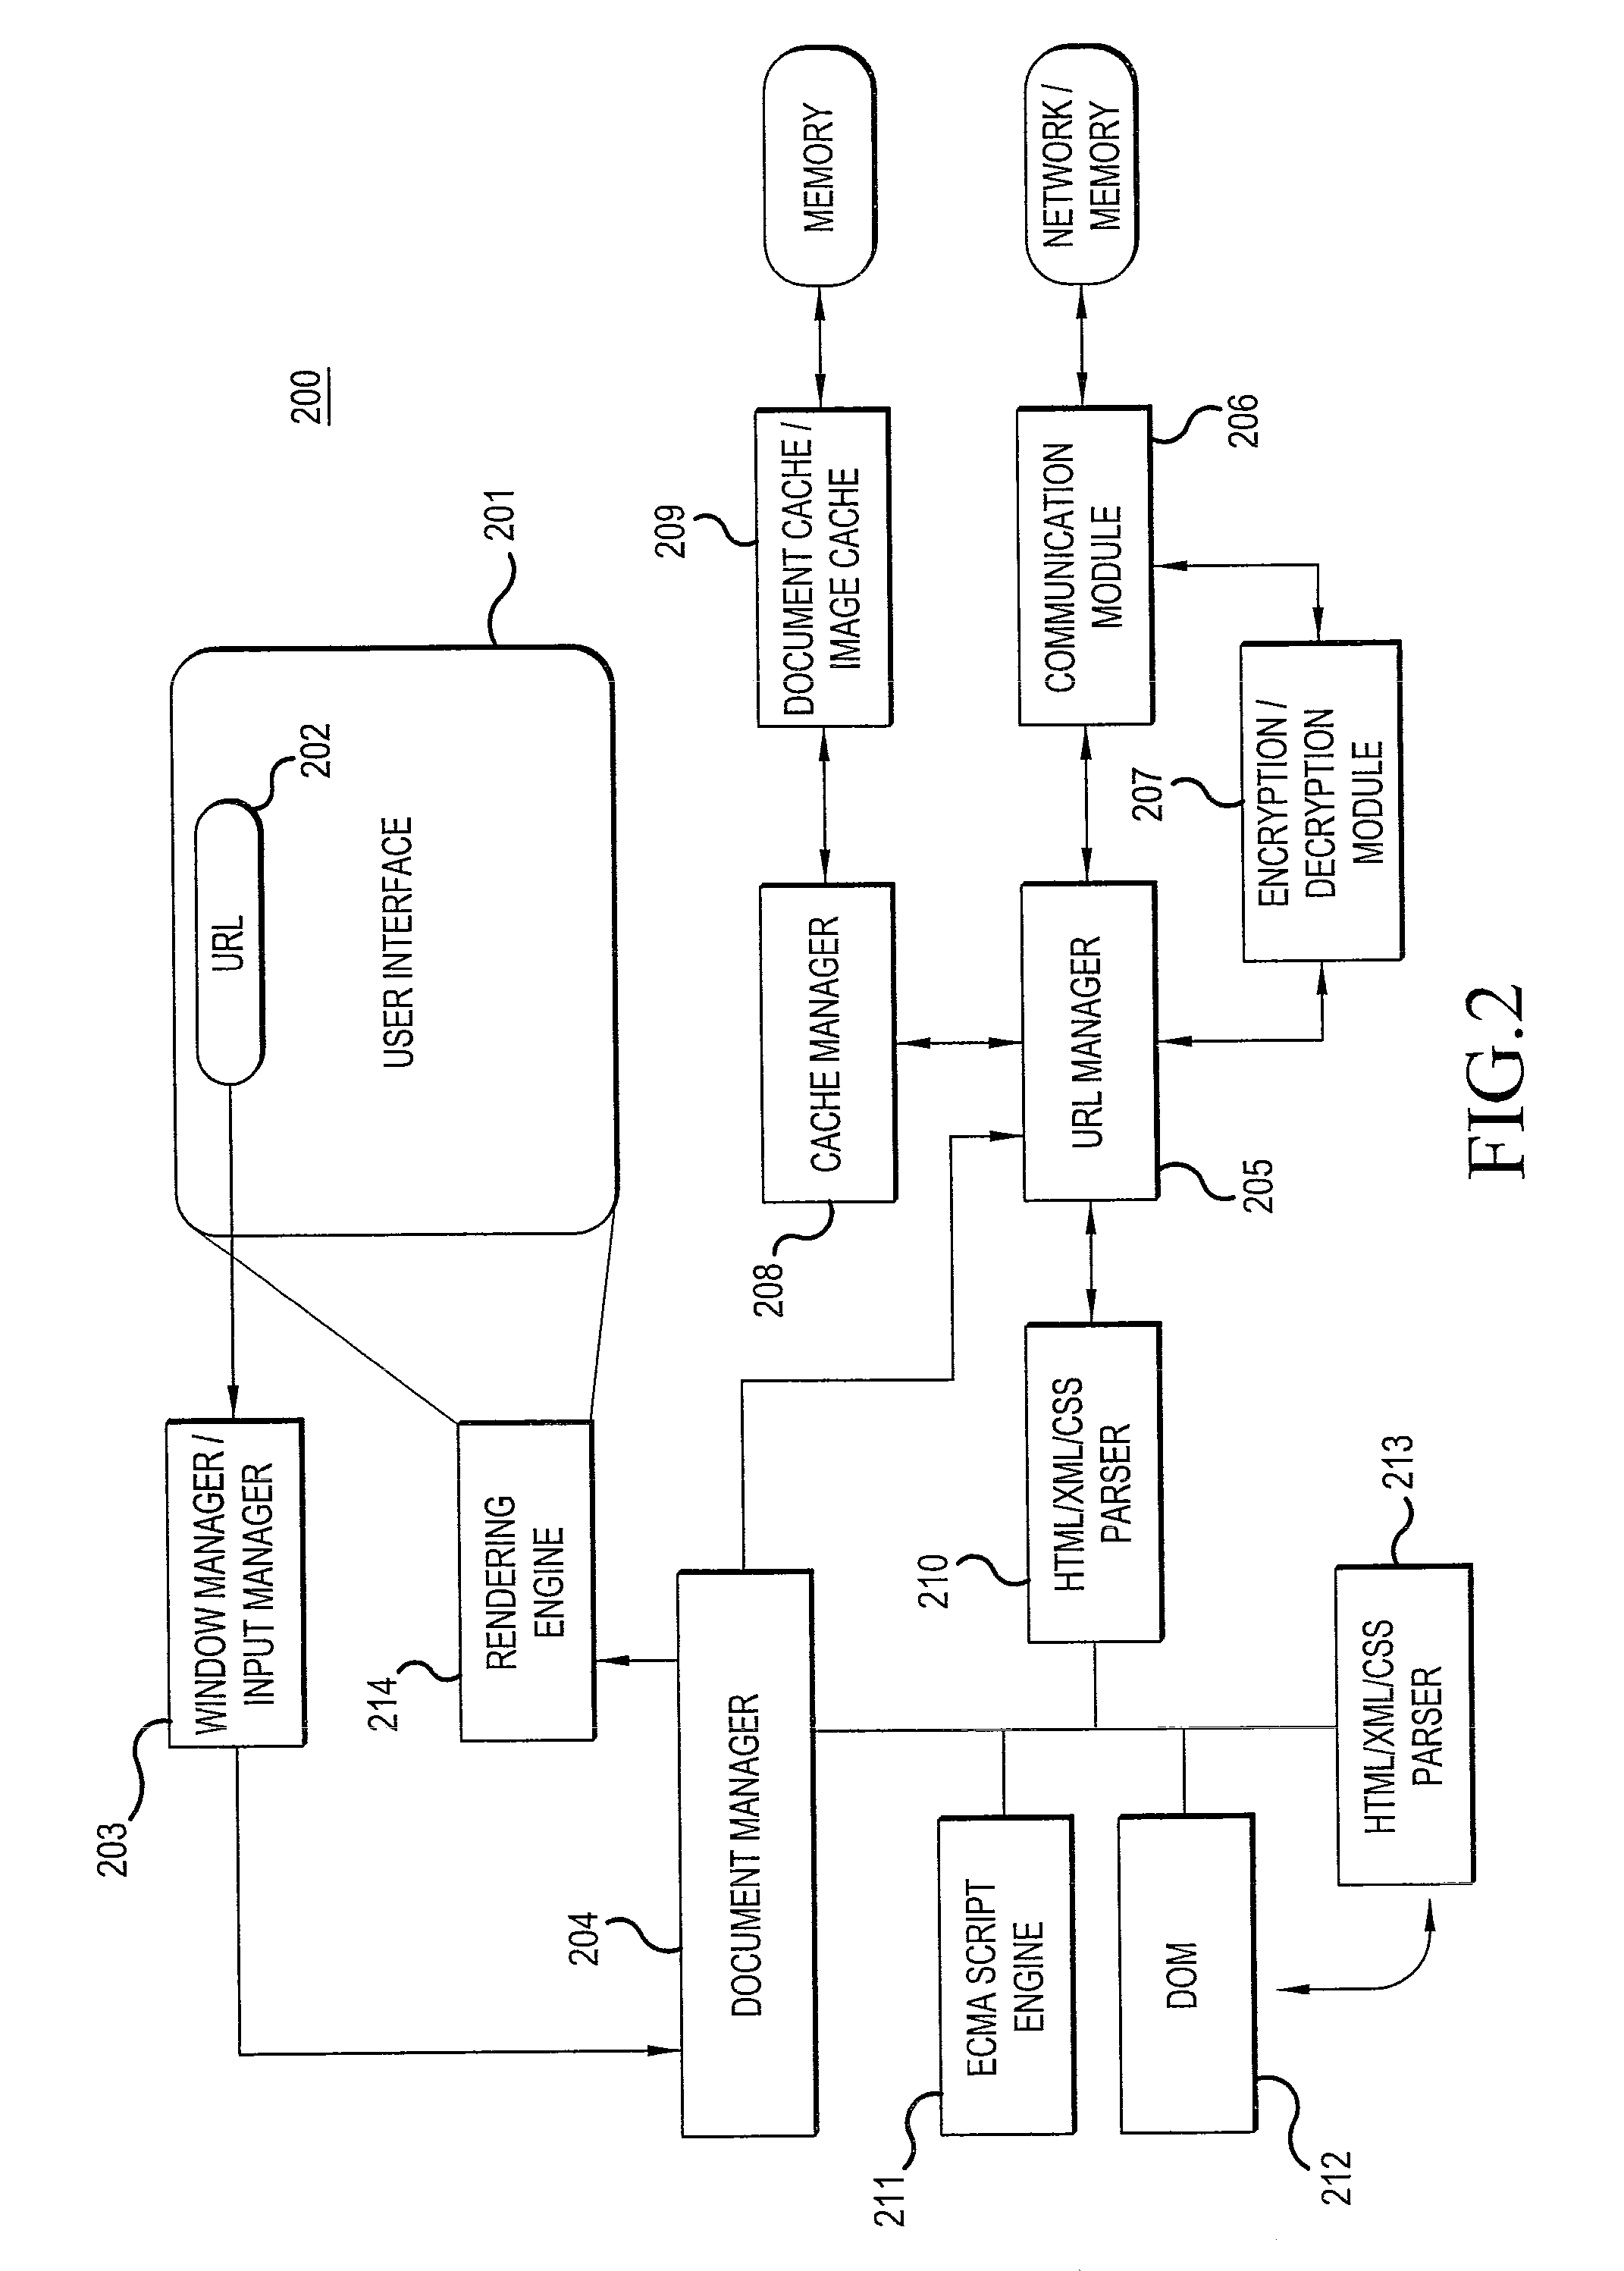 Method and device for dynamically wrapping text when displaying a selected region of an electronic document